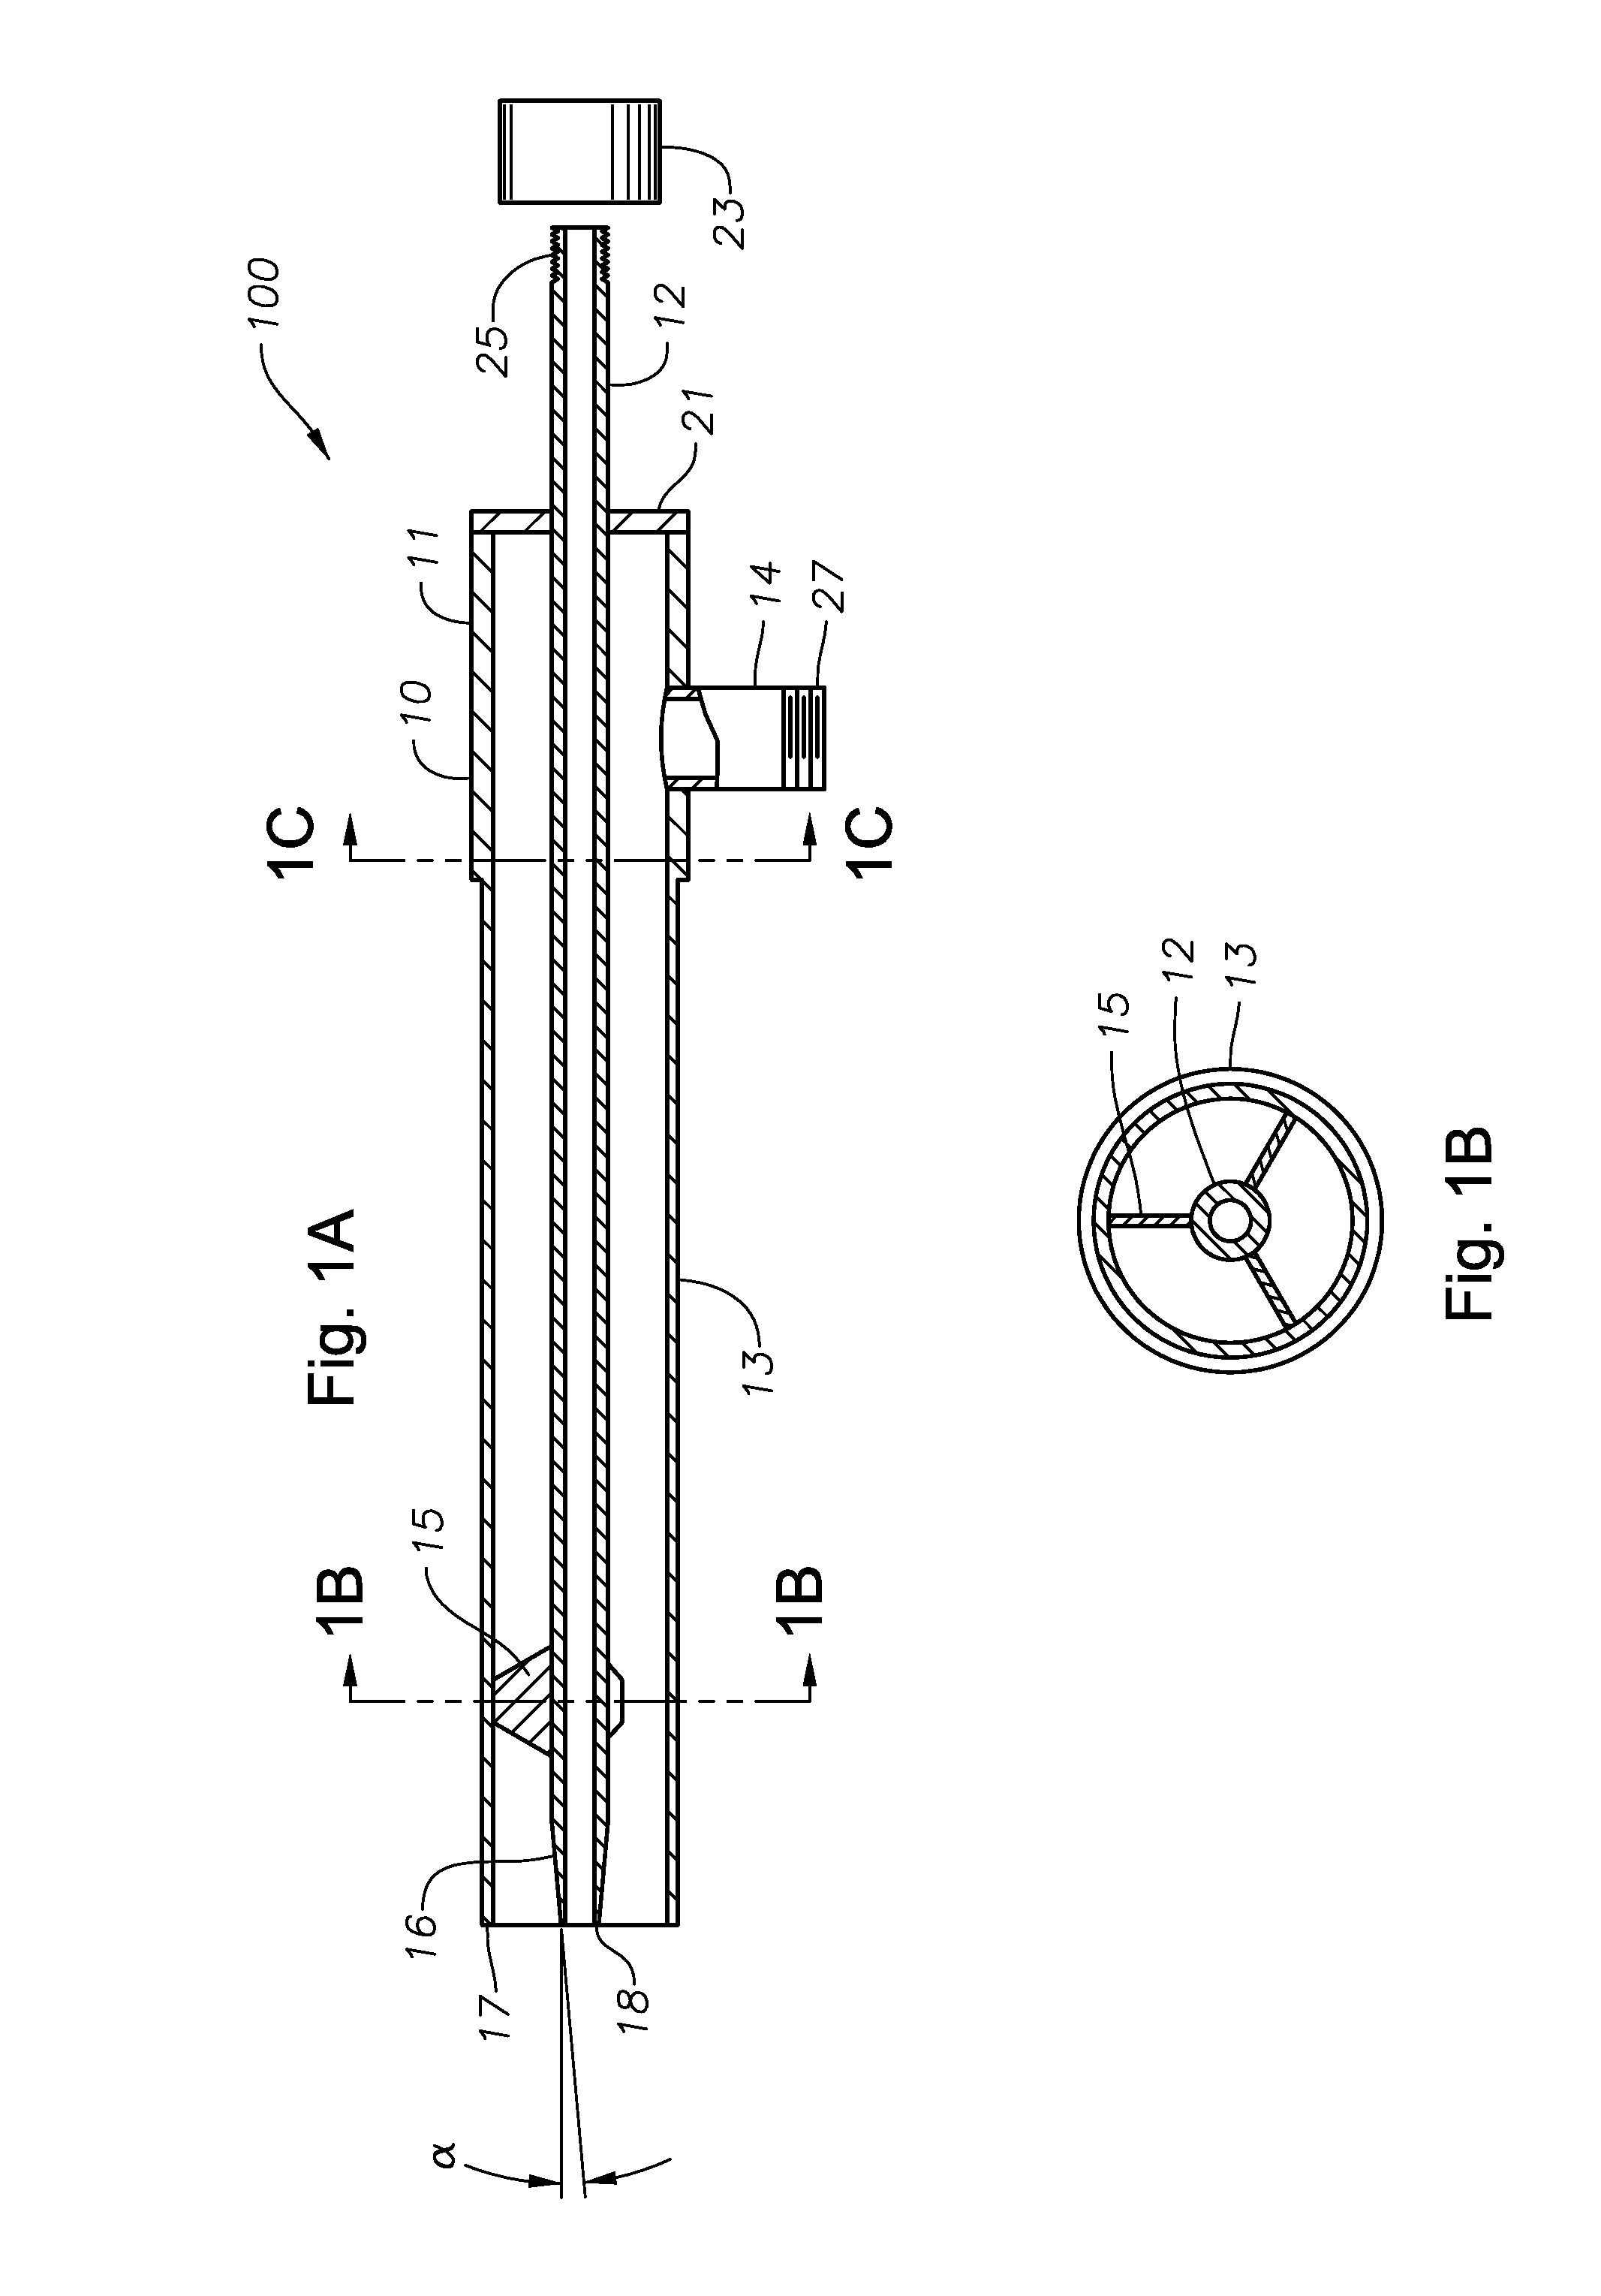 Systems and methods for glass manufacturing